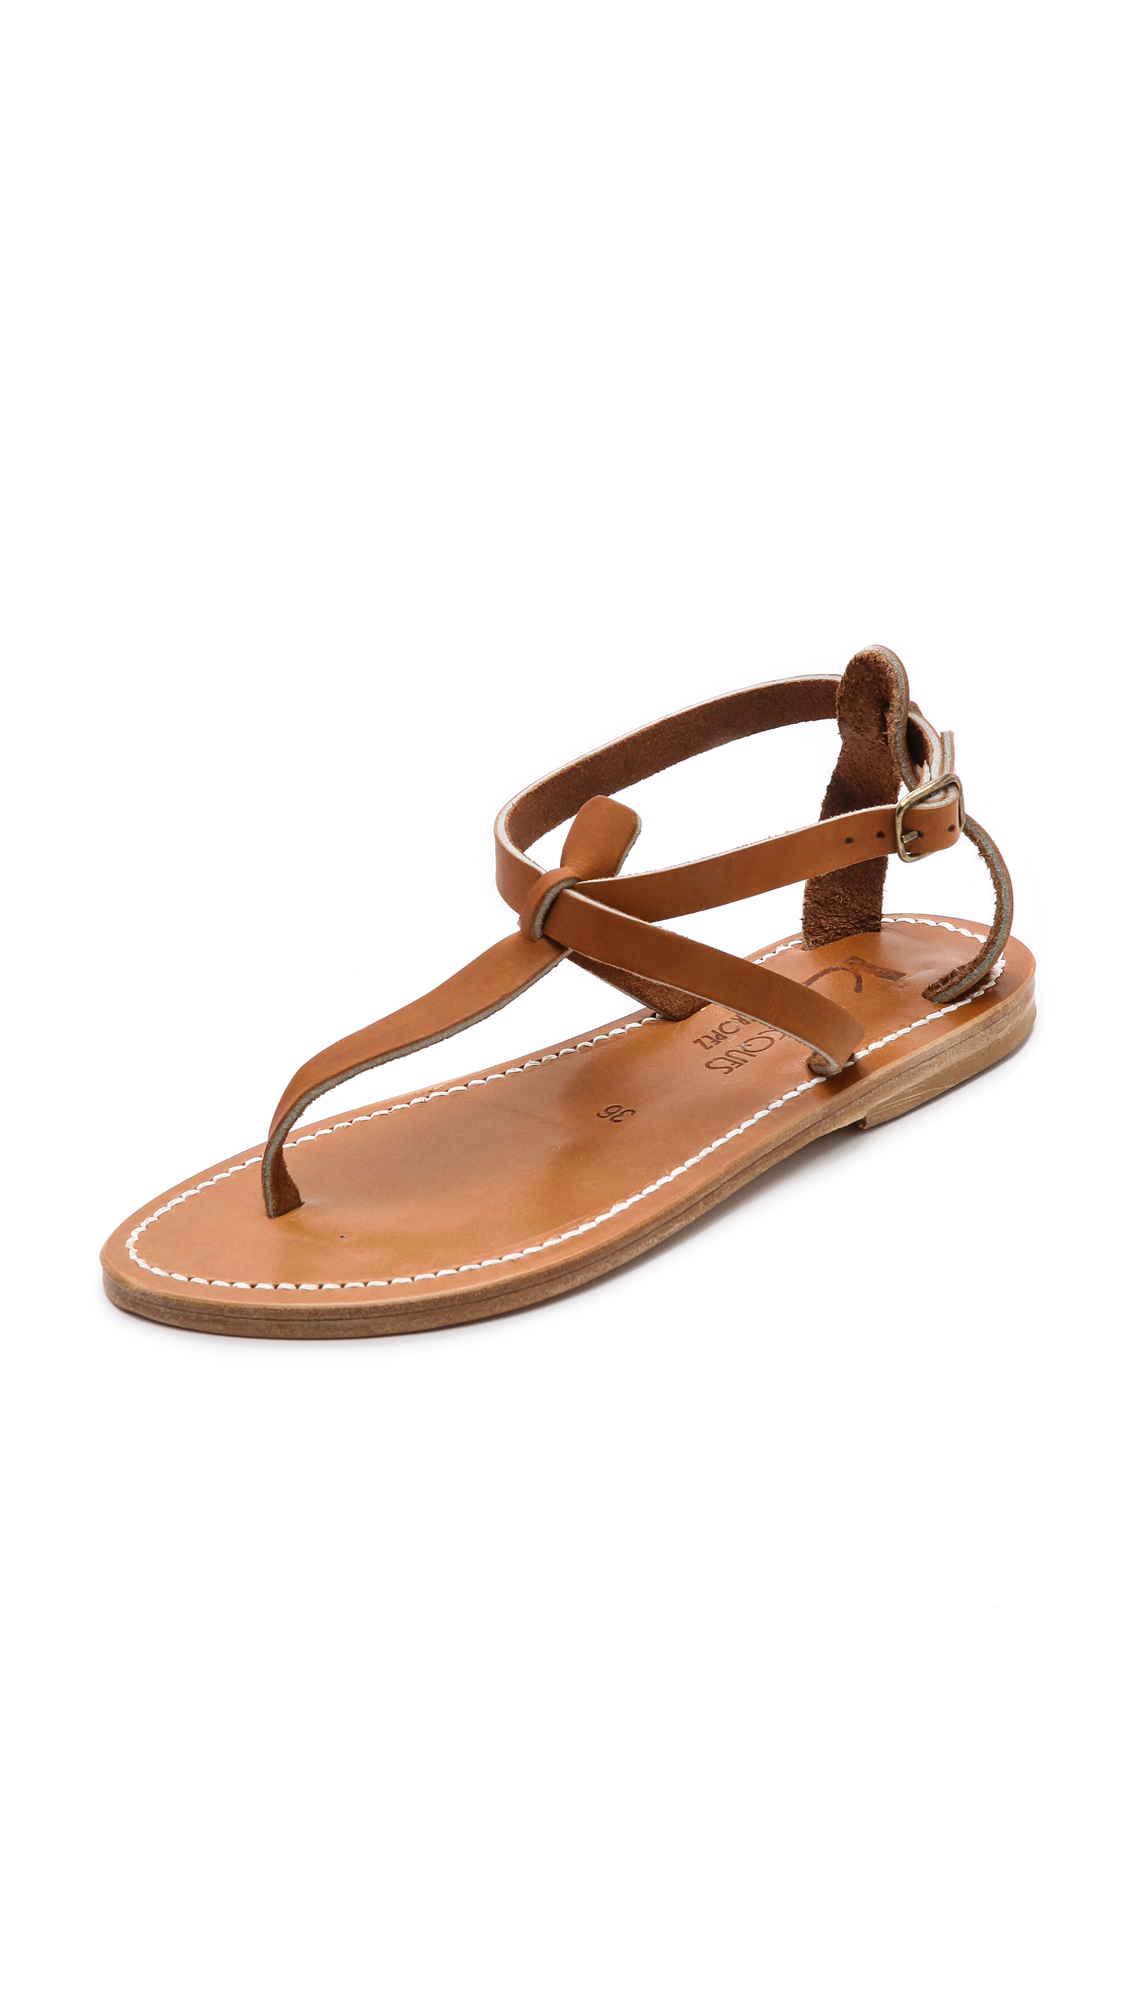 K. Jacques Buffon Tstrap Sandals in Brown (Pul Natural) | Lyst